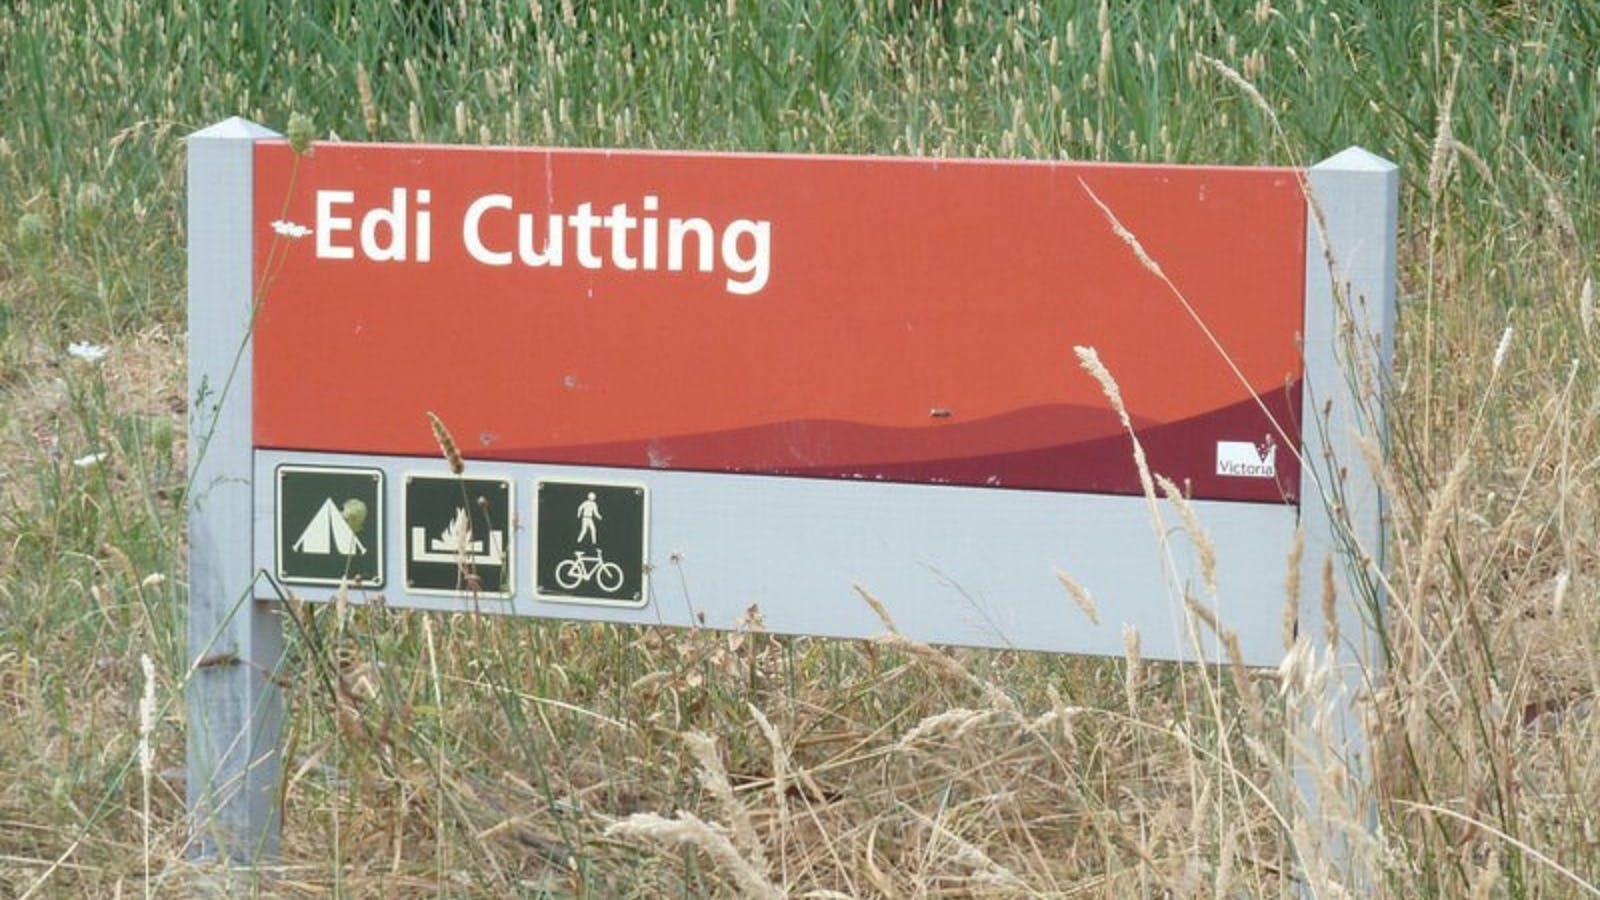 Sign for entry into Edi Cutting, surrounded by native grasses.